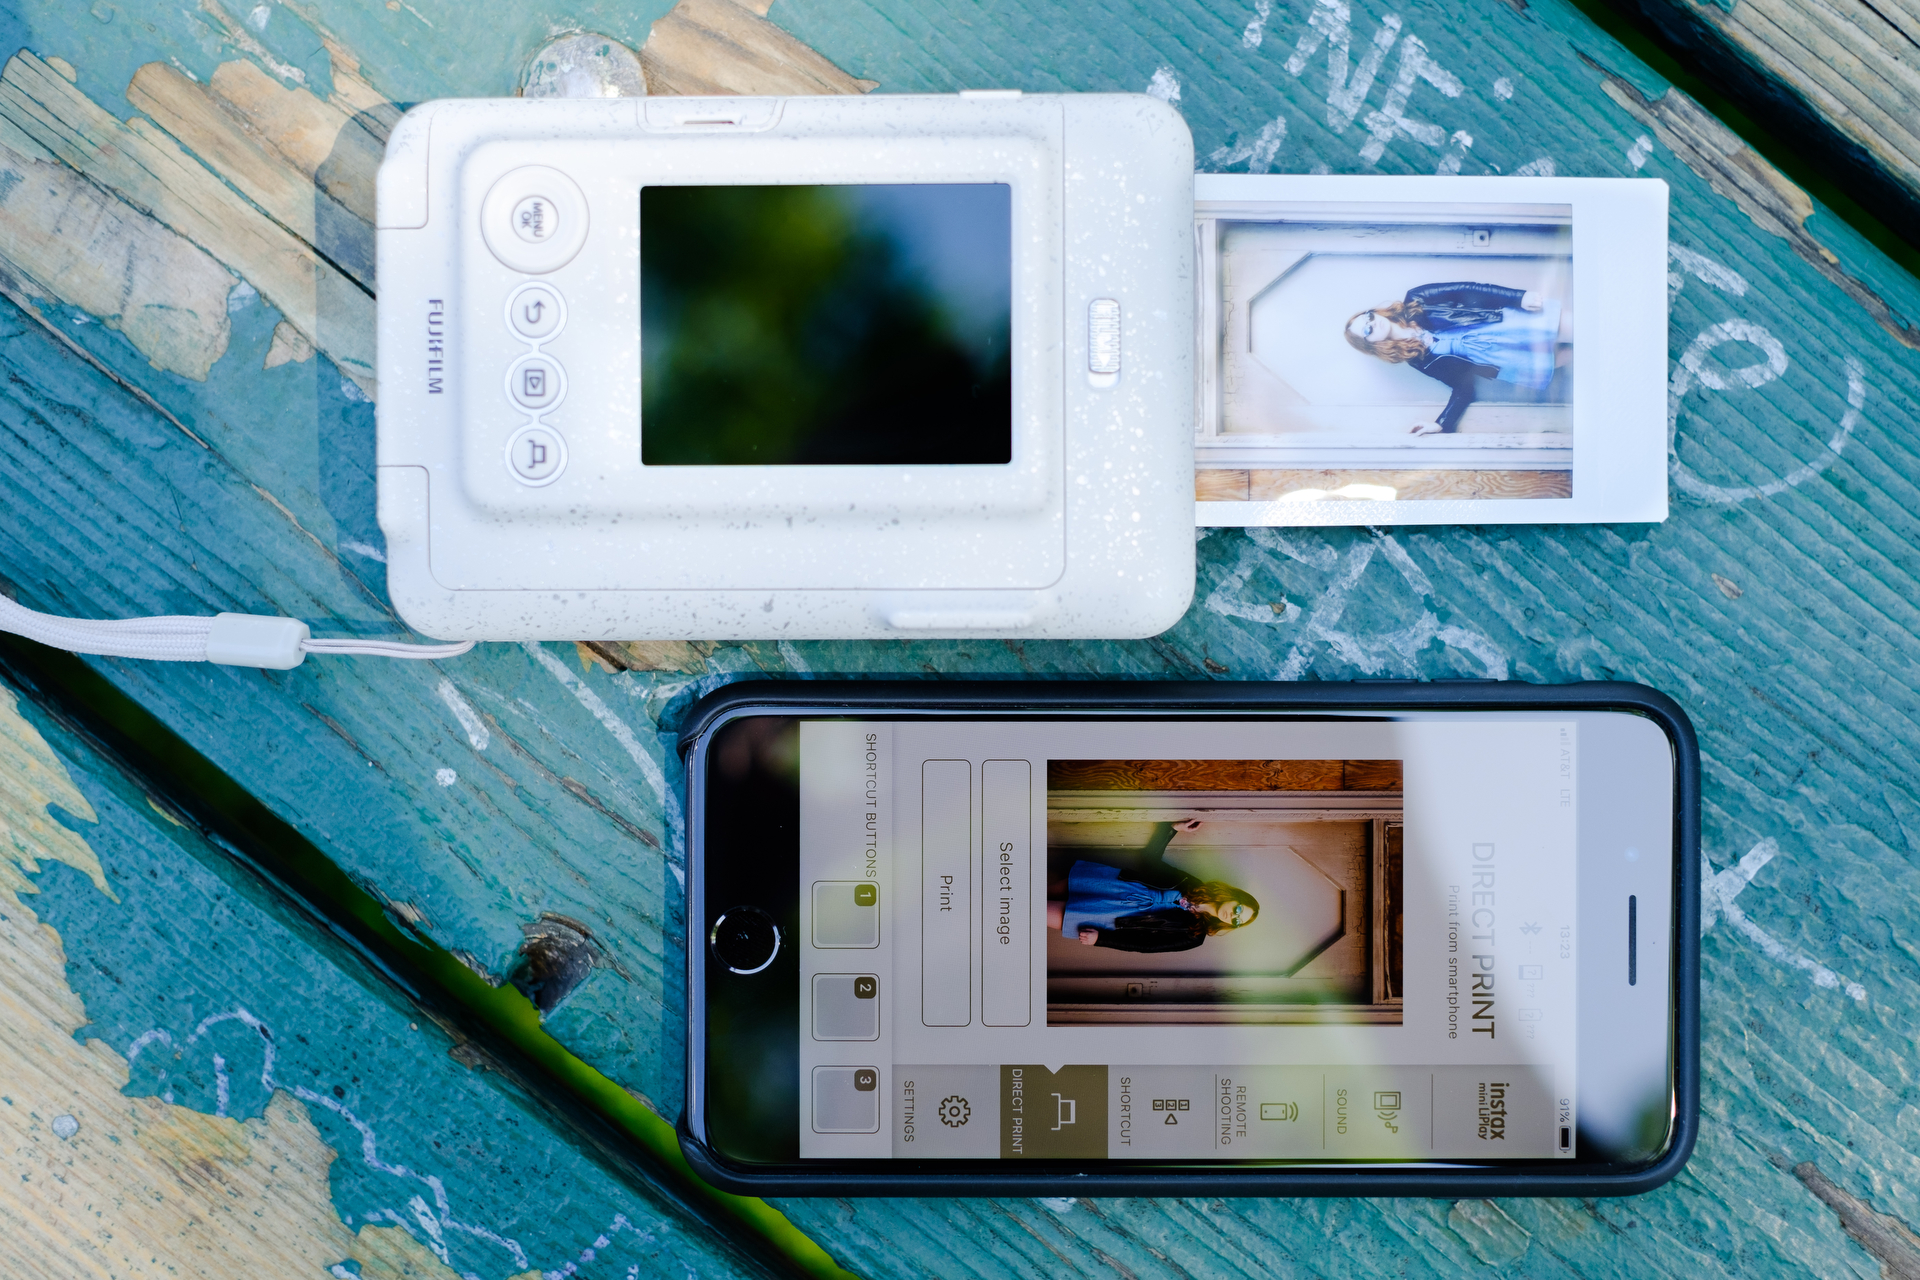 Instax LiPlay Review: How Instagram Ruined This Instant Camera